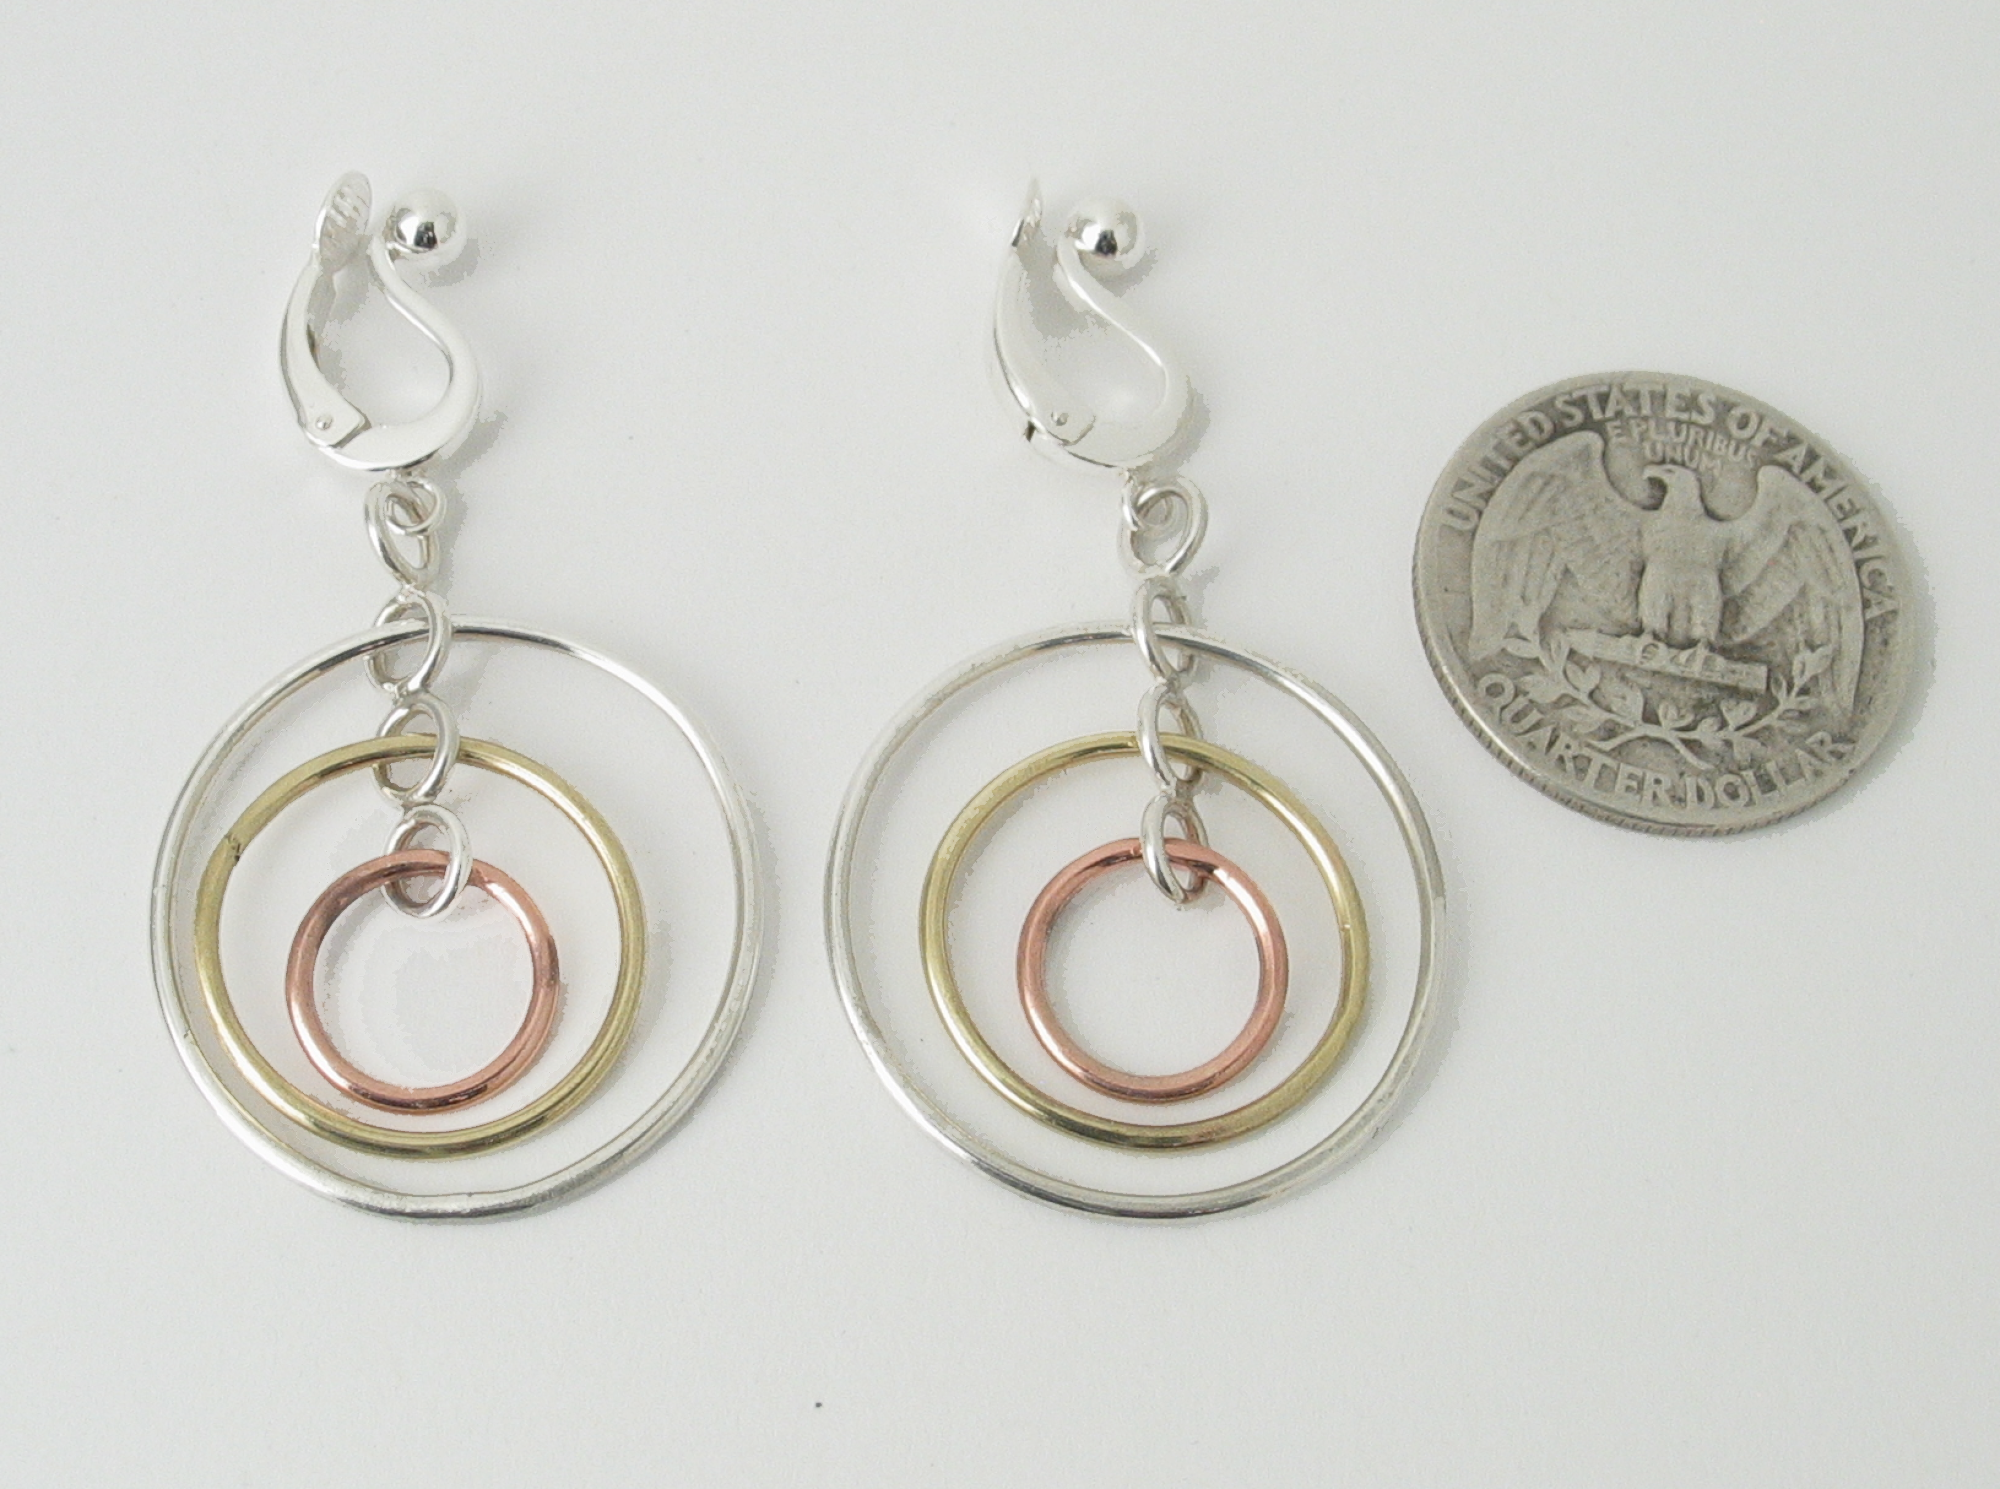 Elegant 925 Sterling Silver Clip On Earrings with Mixed Metal Hoops of Argentium 935 Sterling Silvder, Copper and Brass